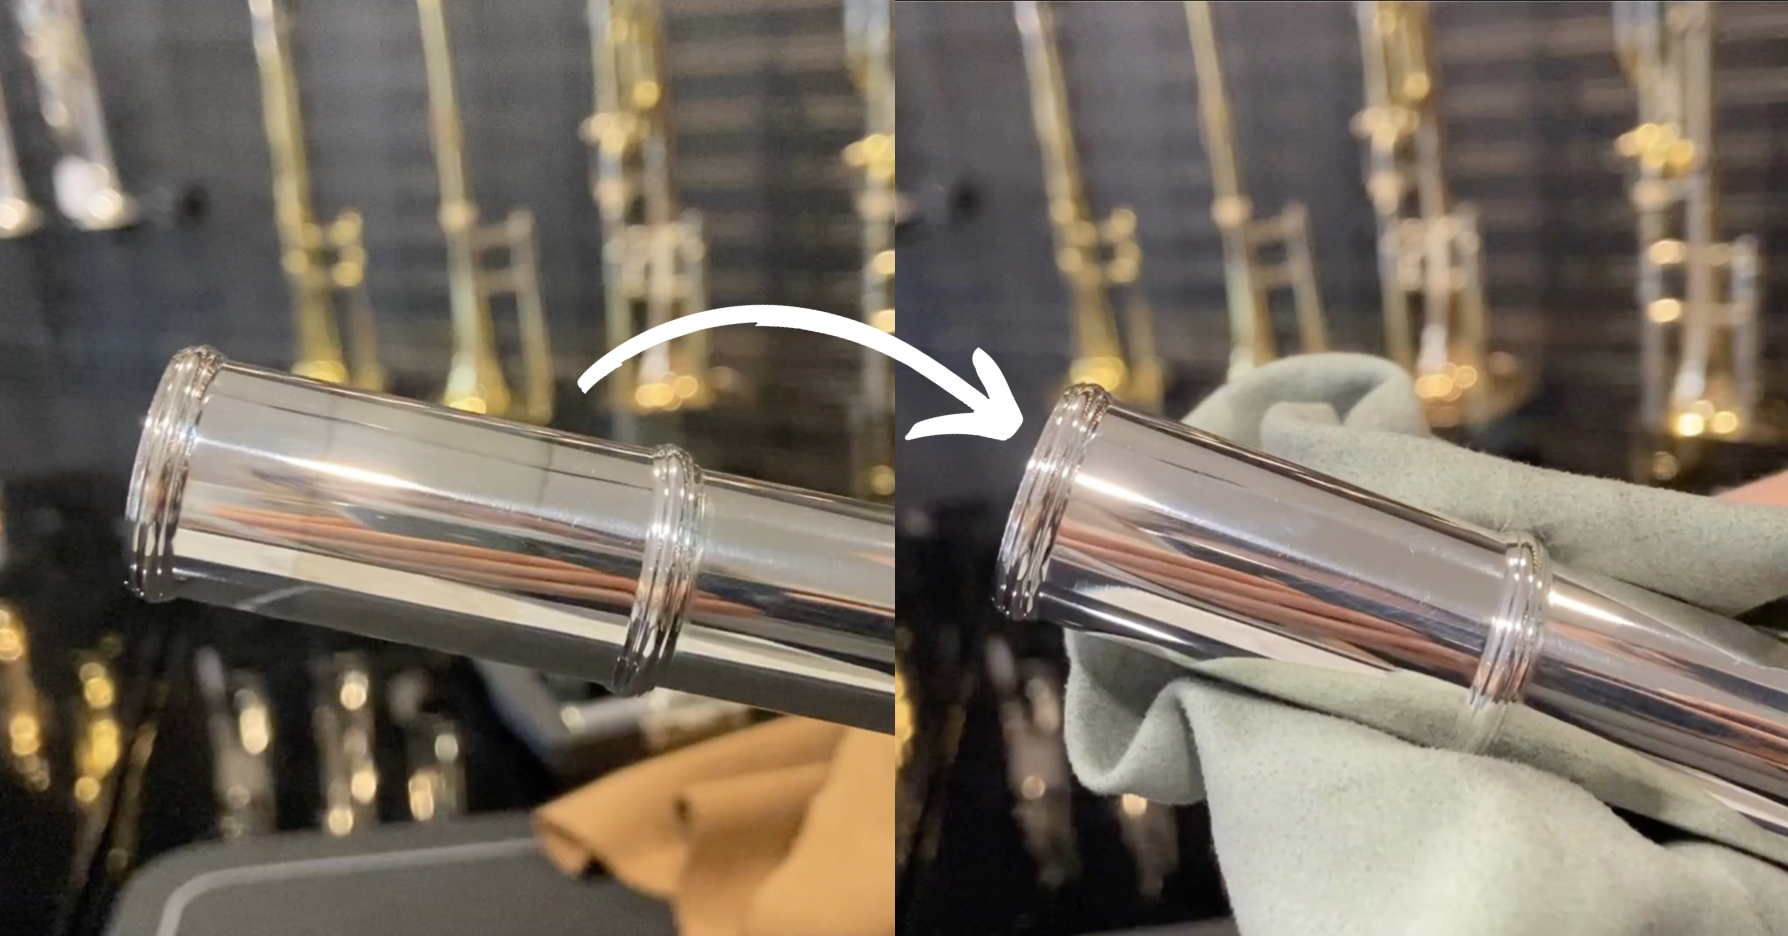 Two images side by side. On the left, there is visible tarnish on the flute. On the right, the same spot is shiny and the tarnish has been removed.